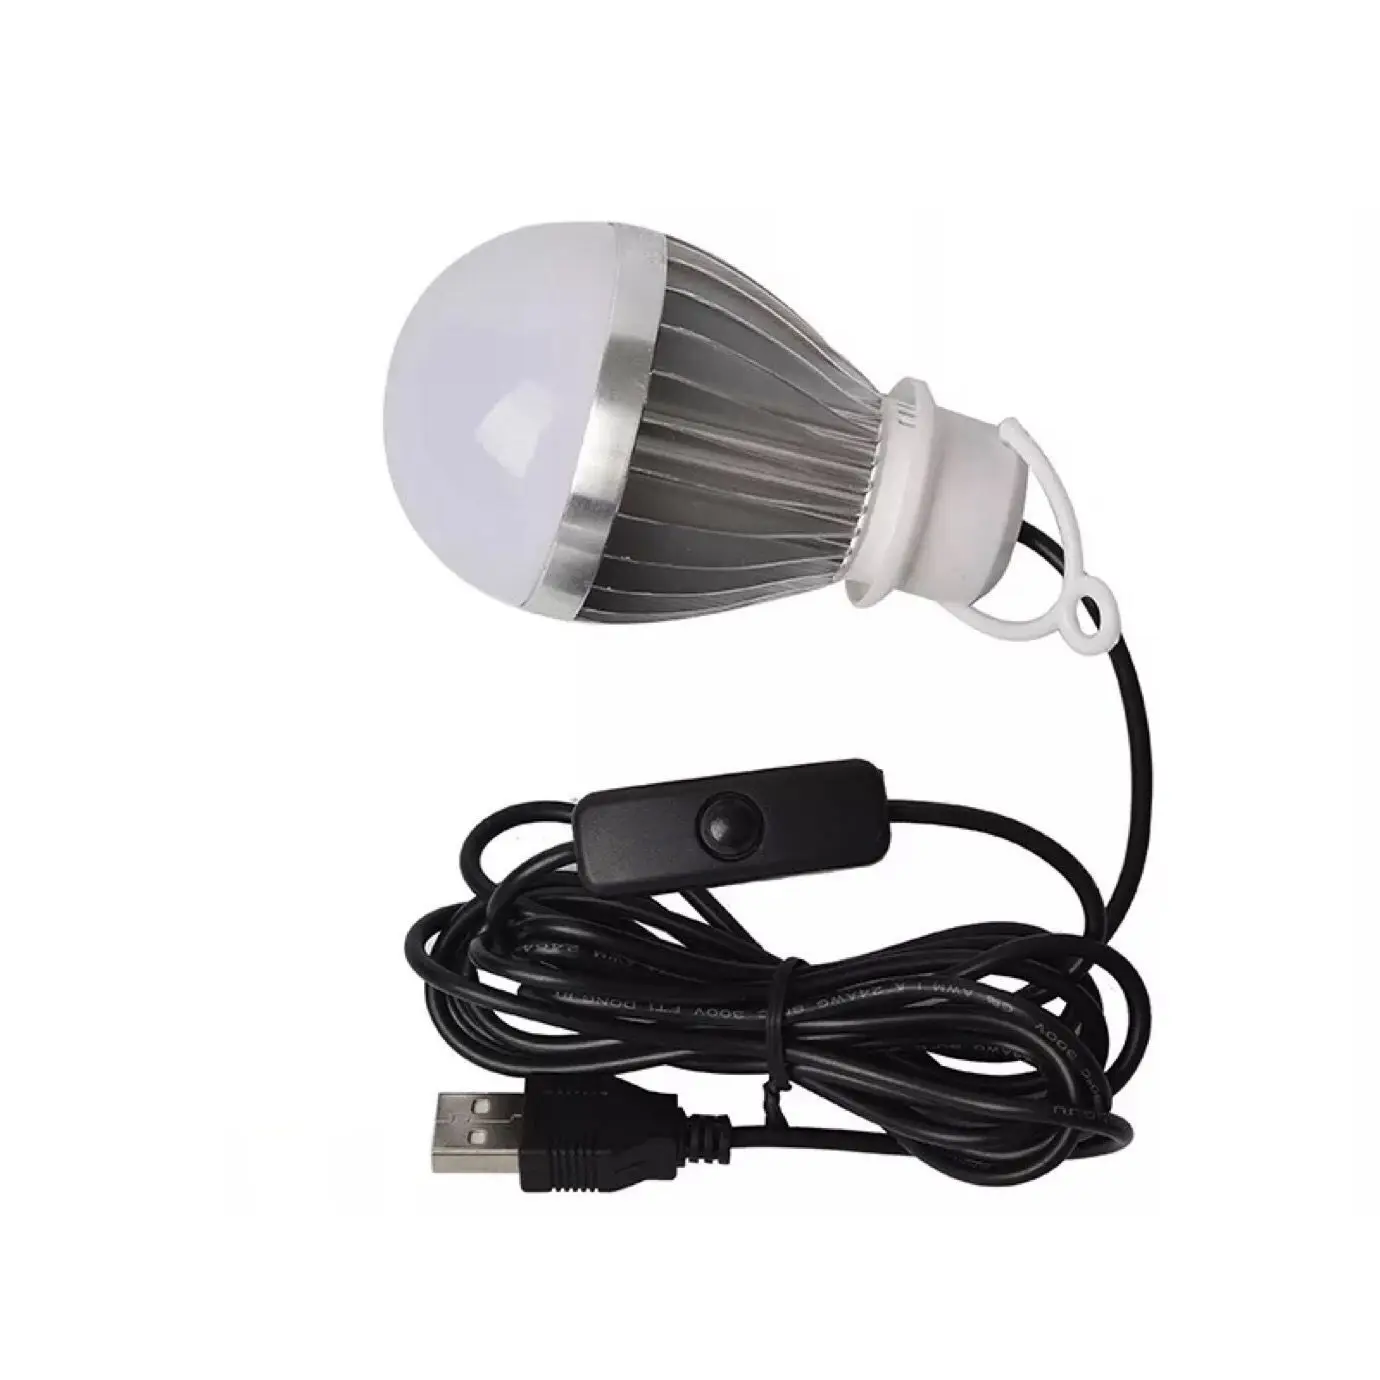 Factory price 3W USB Plug colorful led lighting emergency bulb with 2M cable